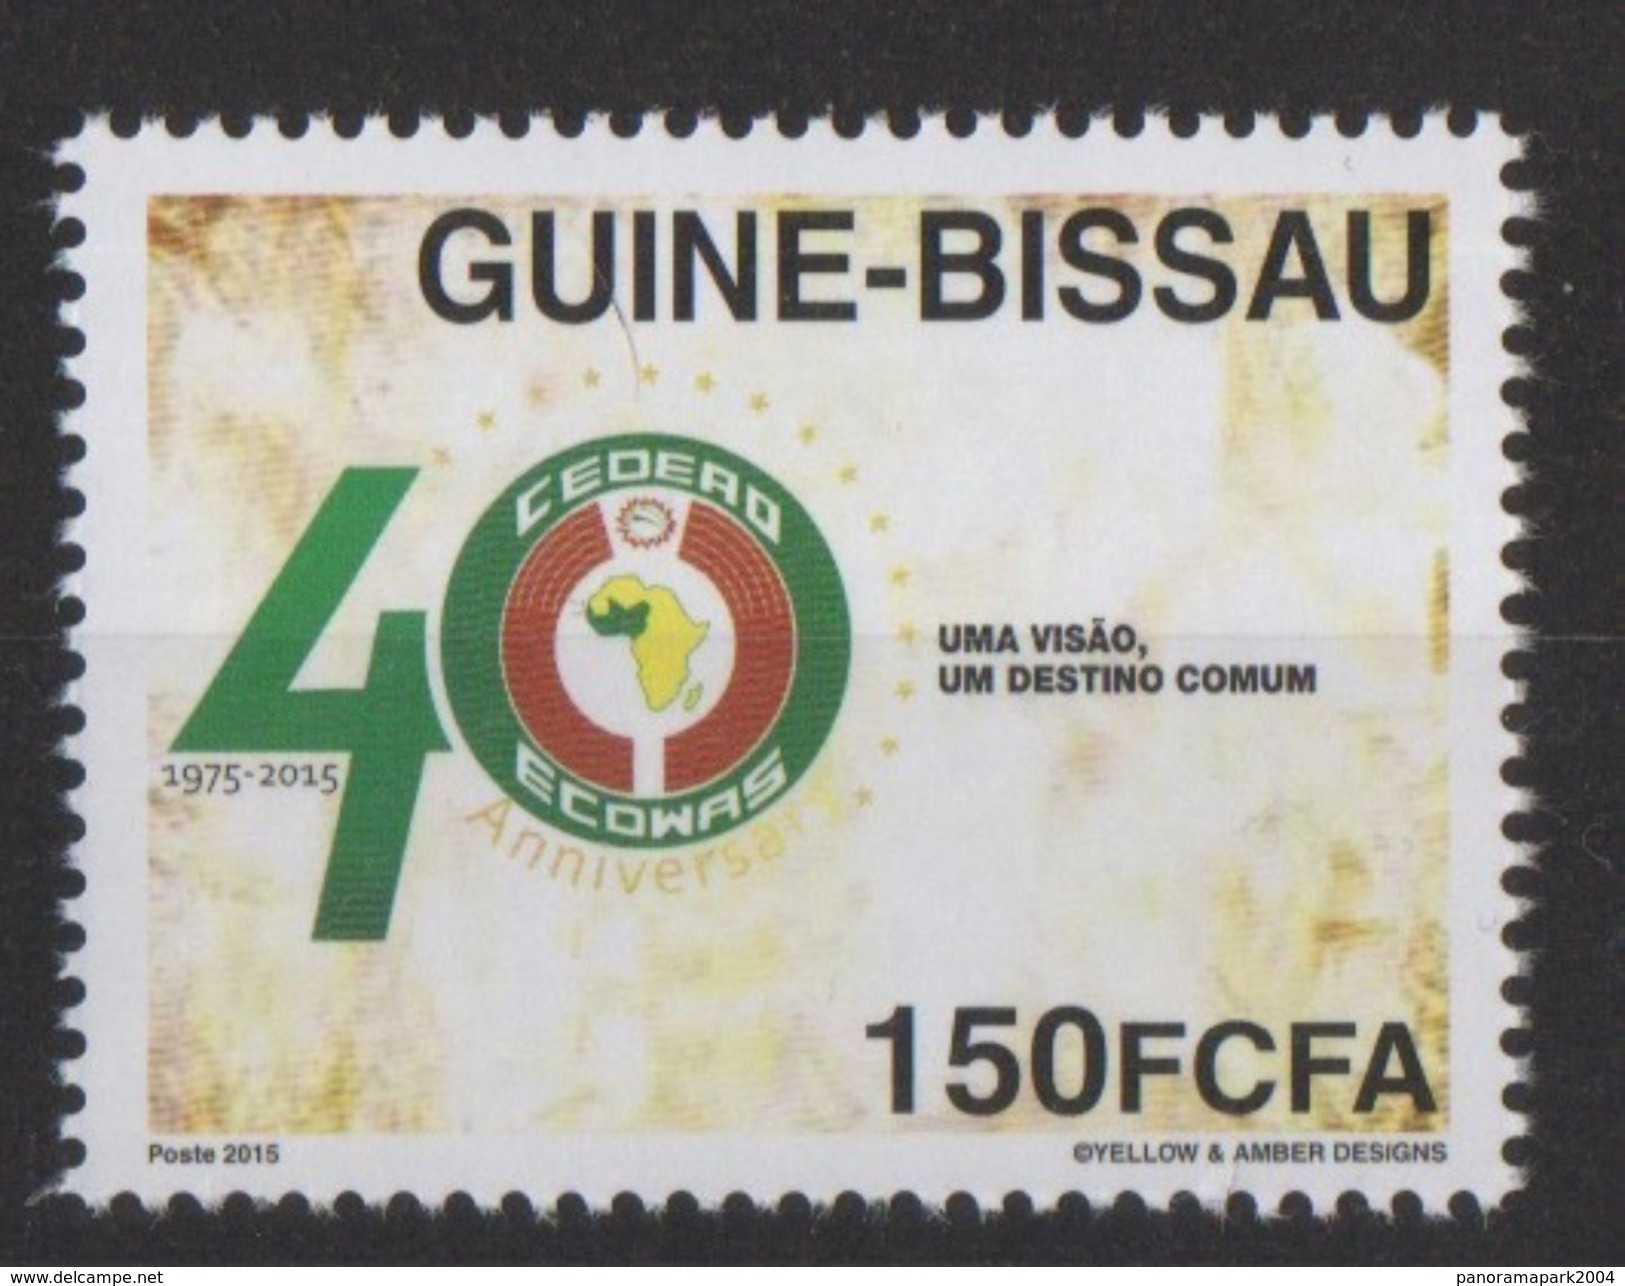 Guiné Bissau Guinea Guinée 2015 Emission Commune Joint Issue CEDEAO ECOWAS 40 Ans 40 Years - Joint Issues